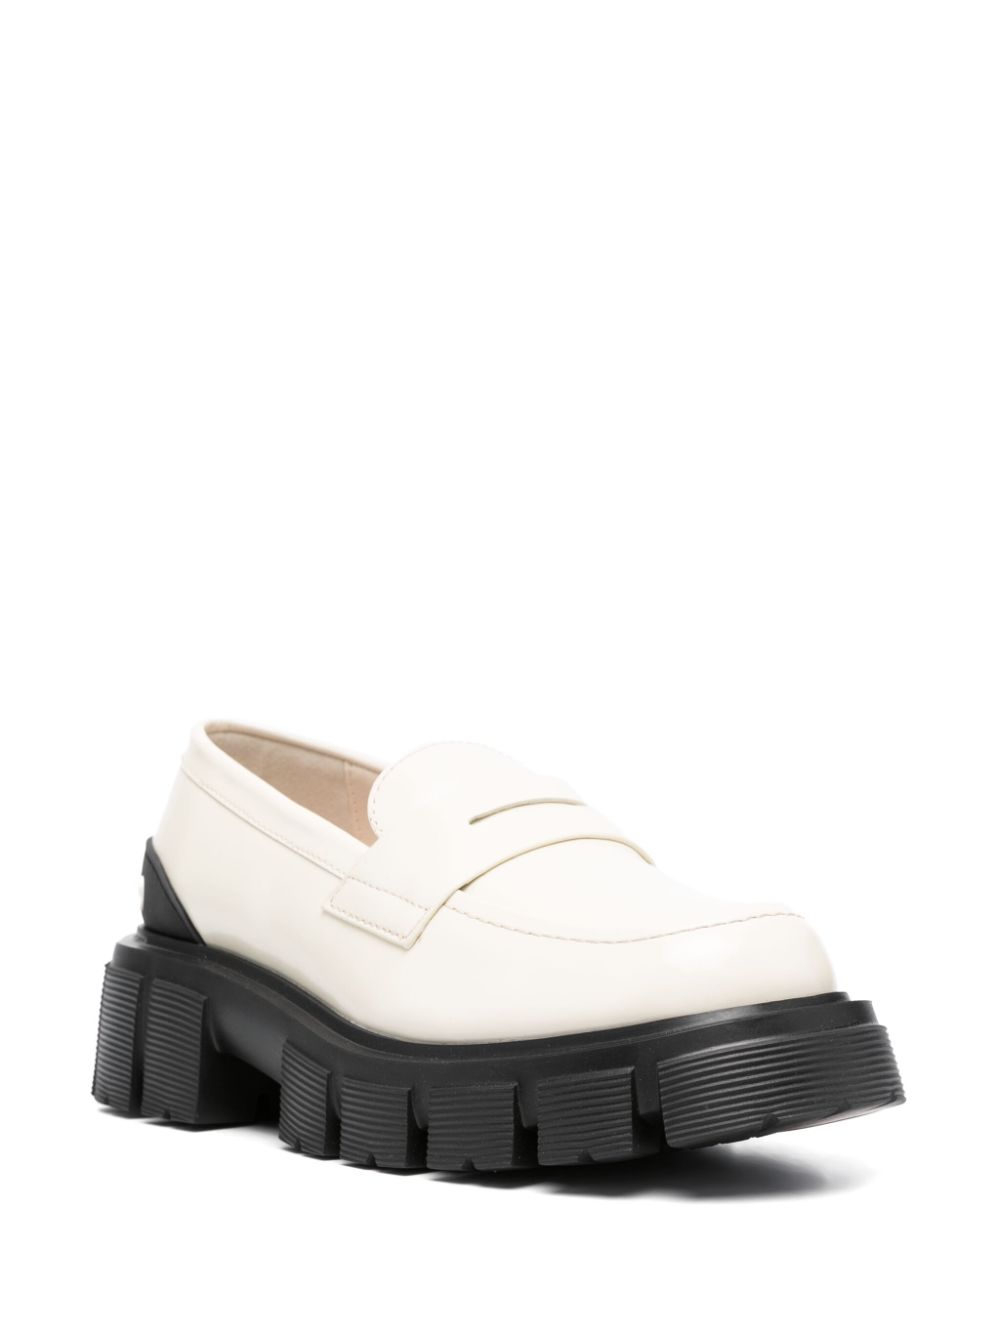 Love Moschino logo-raised detail leather loafers - Beige